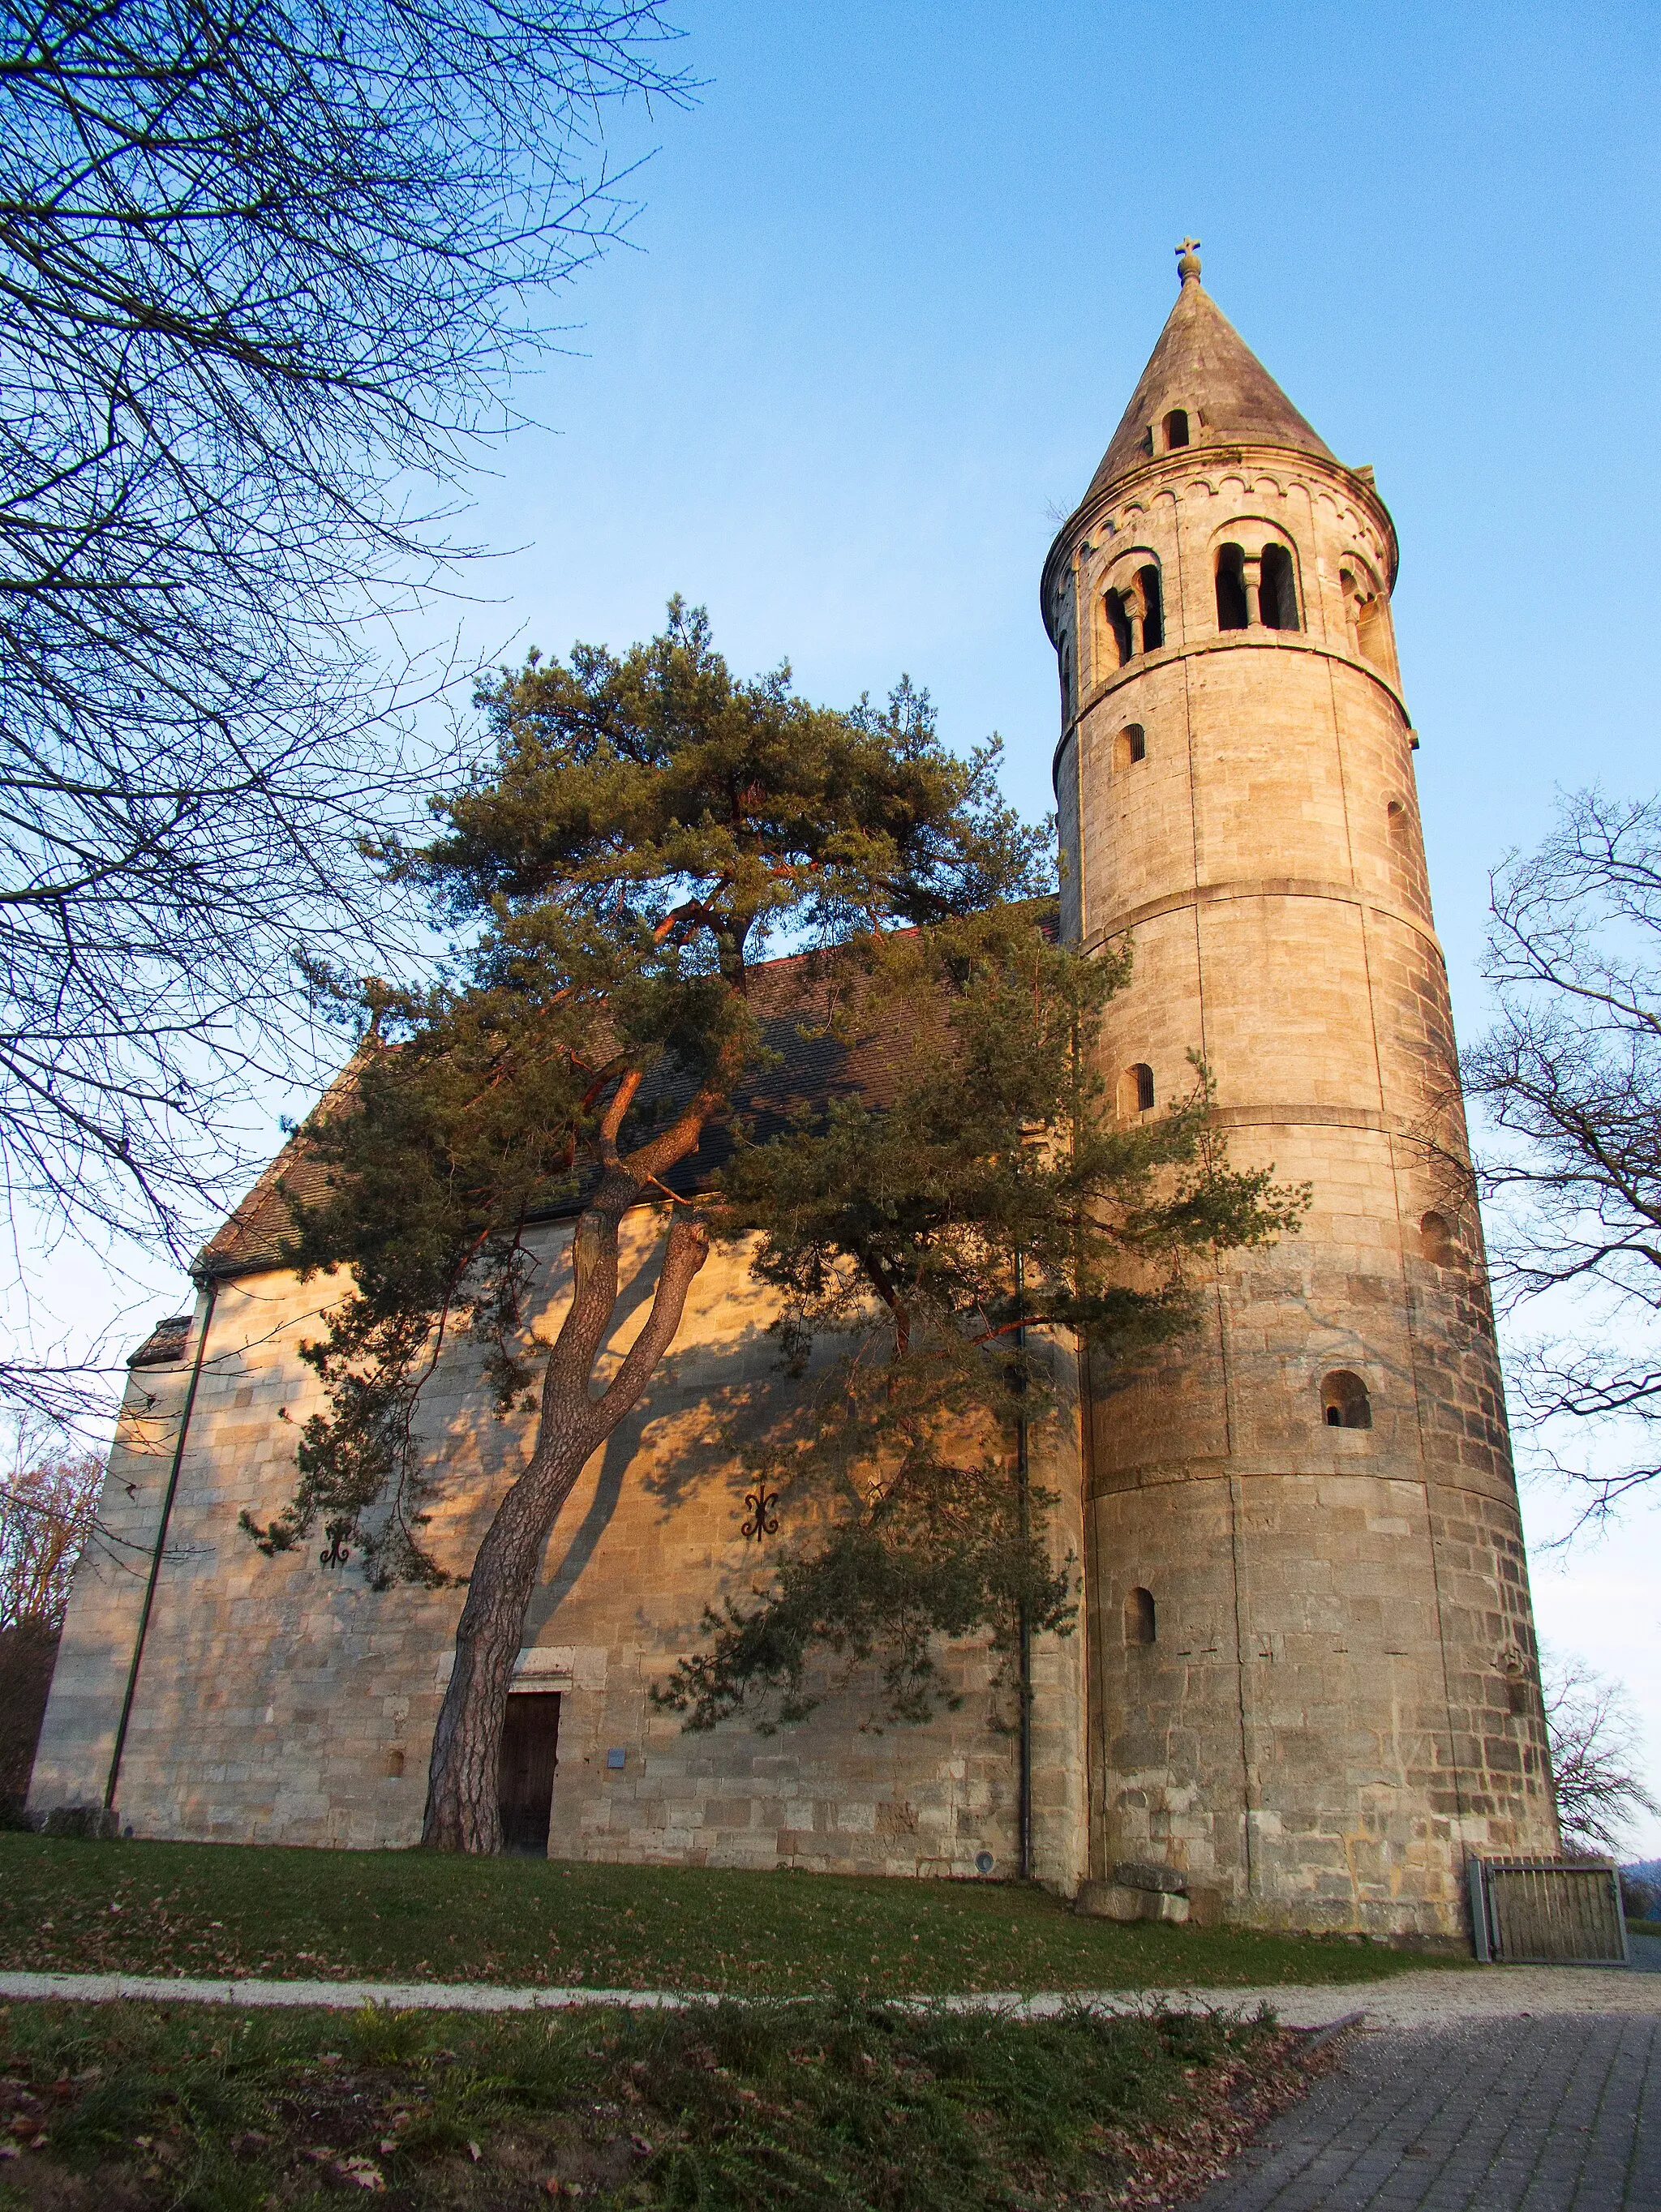 Photo showing: Western front of monastery church of Kloster Lorch, Baden-Württemberg, Germany